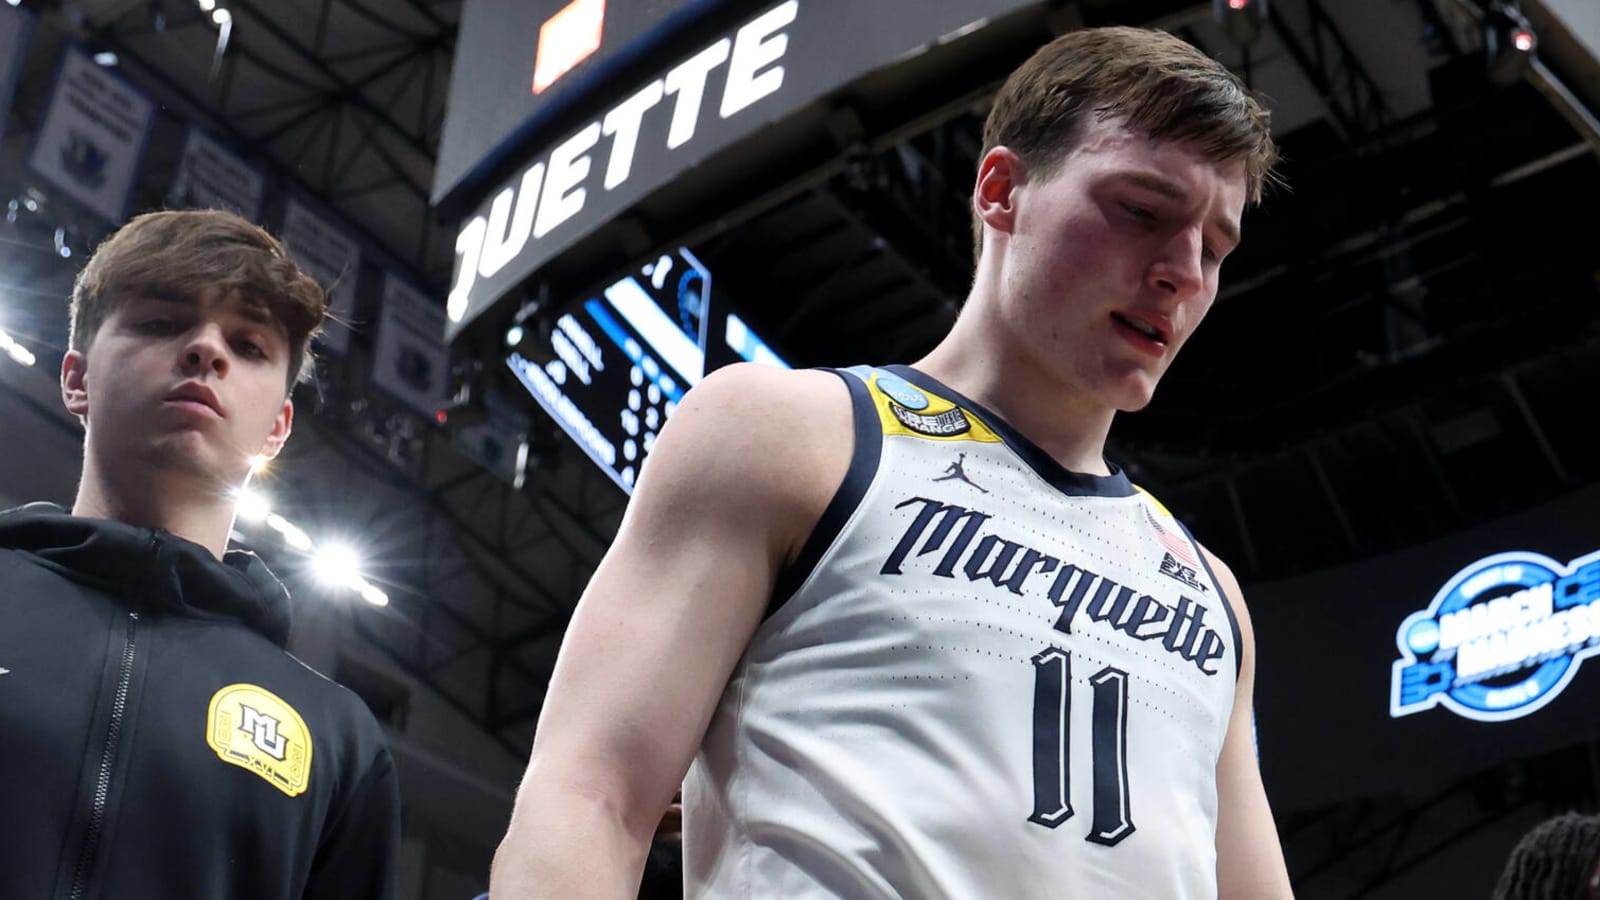 Marquette gets clowned after brutal Sweet 16 loss vs. NC State